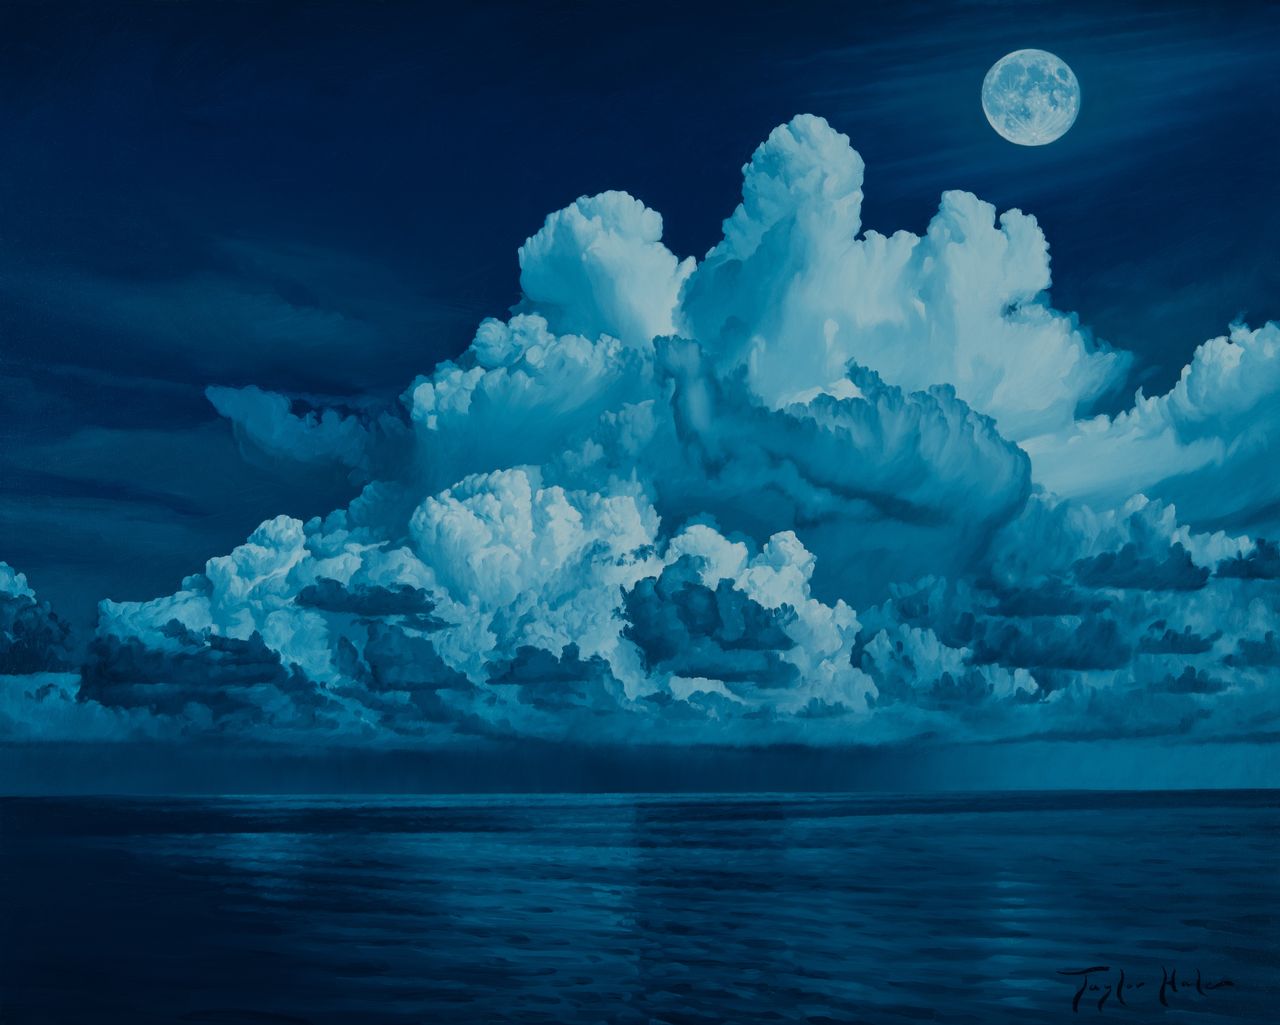 Florida Keys artist Taylor Hale is driven by the constant transformations of the sky and sea and exploring what happens as these powerful natural forces interact, as in his painting Atlantic Moon. 